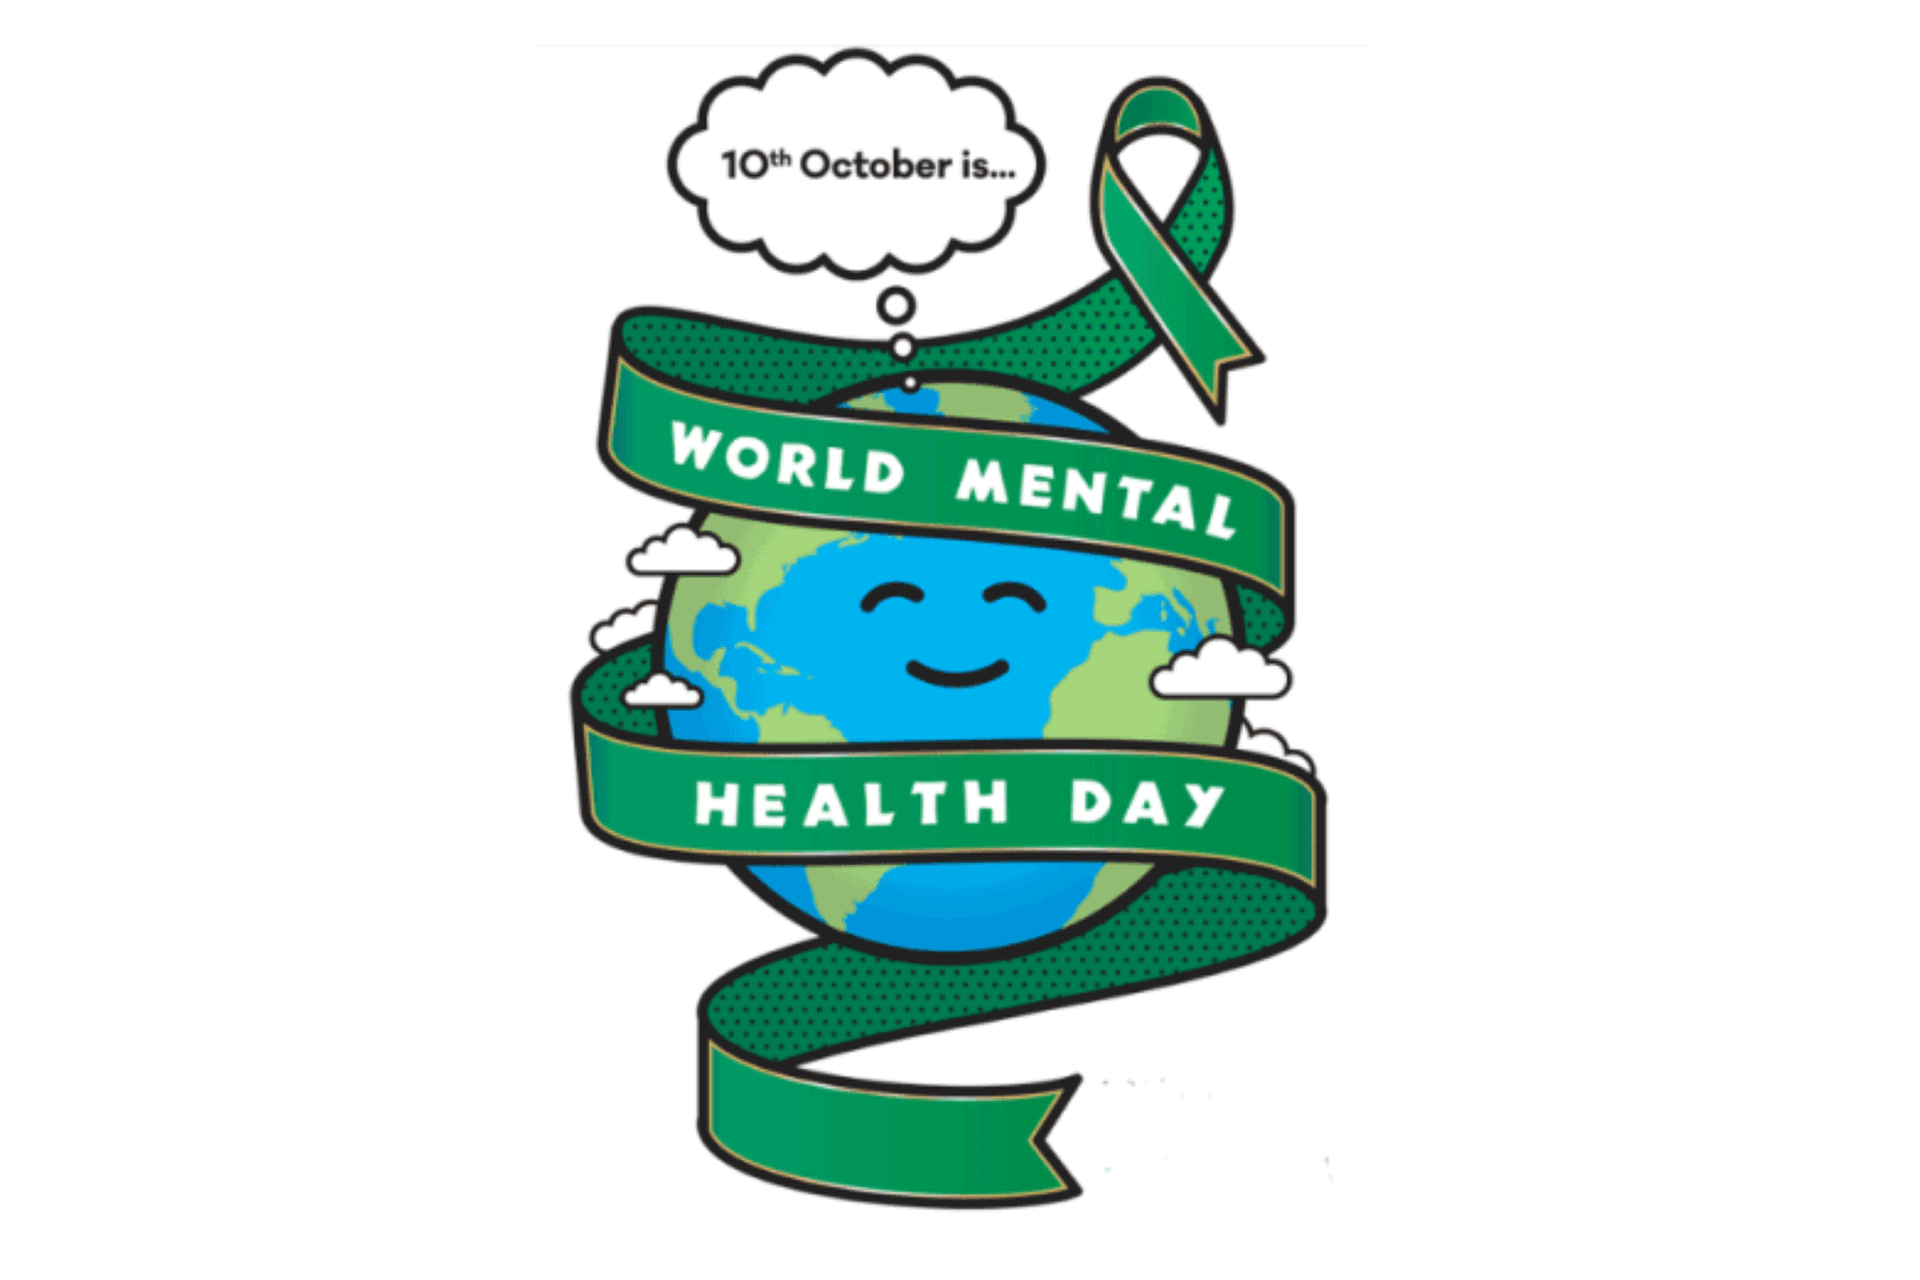 10th October is World Mental Health Day